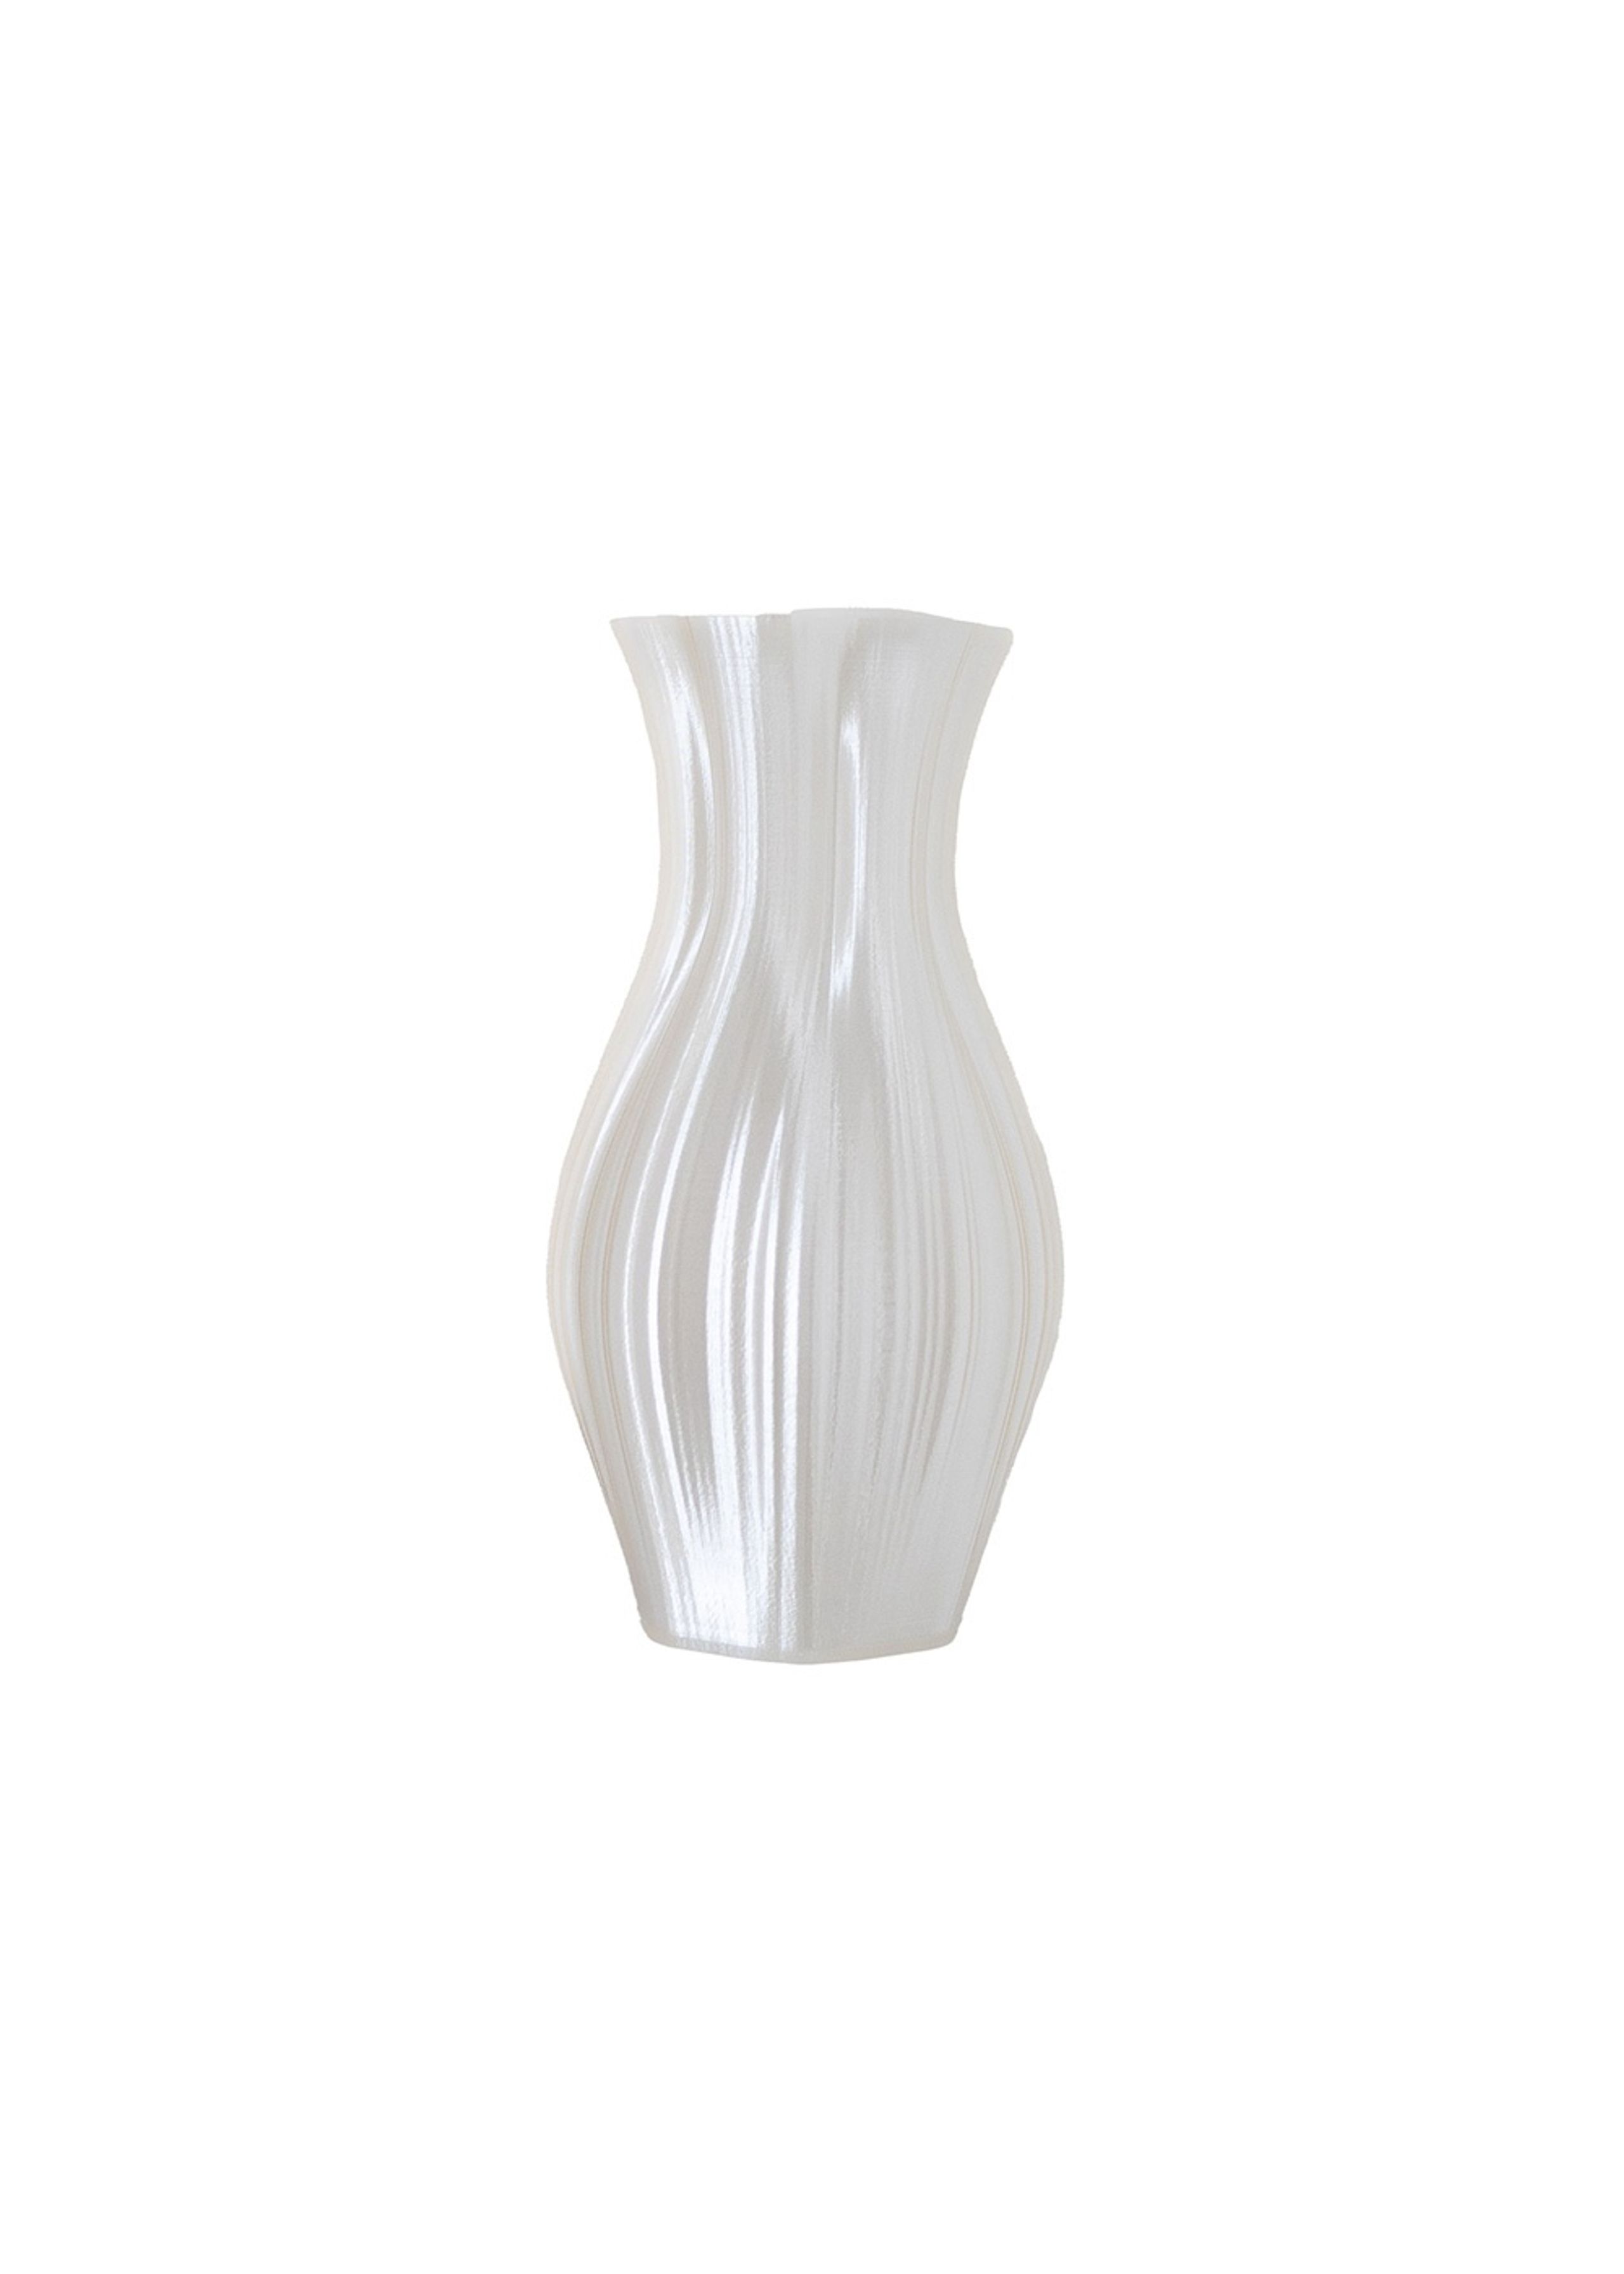 Bloom Objects - Vase - Bloom Vase - Small